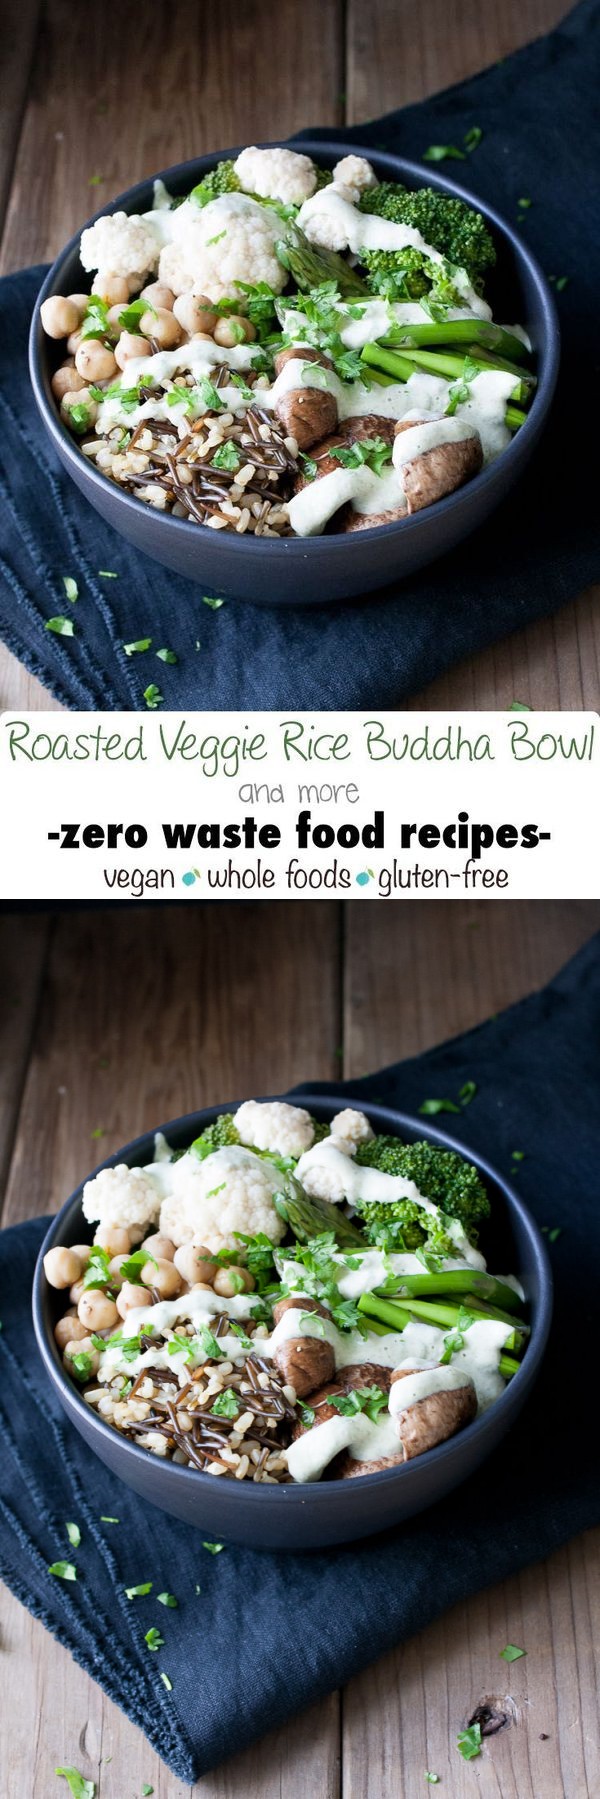 Roasted Veggie and Wild Rice Buddha Bowl with Creamy Lemon Herb Sauce (with optional spice